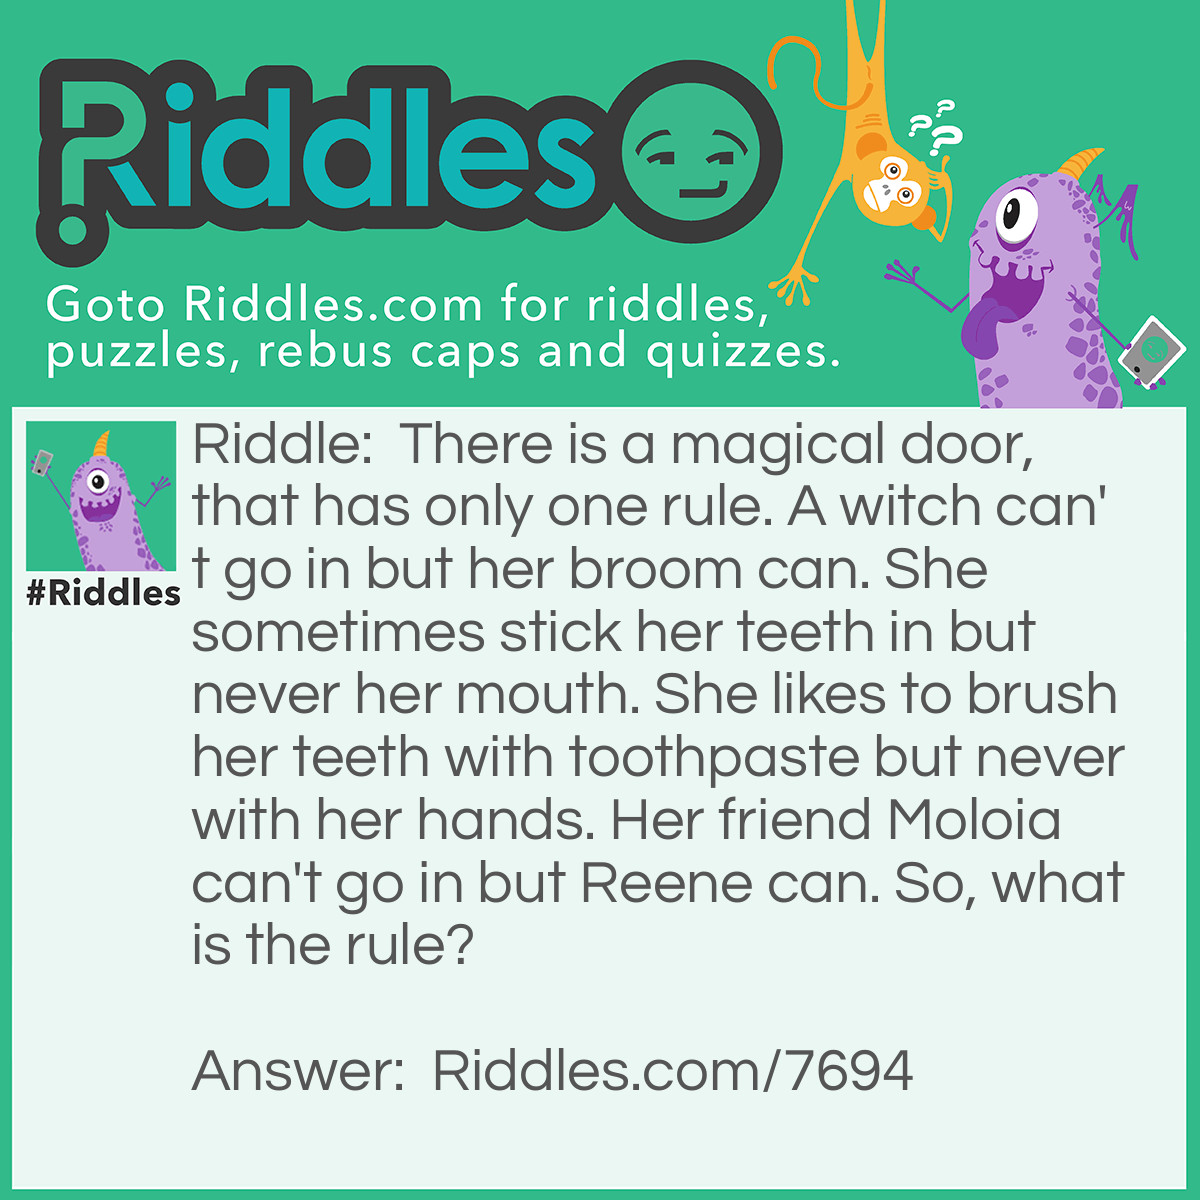 Riddle: There is a magical door, that has only one rule. A witch can't go in but her broom can. She sometimes stick her teeth in but never her mouth. She likes to brush her teeth with toothpaste but never with her hands. Her friend Moloia can't go in but Reene can. So, what is the rule? Answer: Anything with a double letter like Sally.